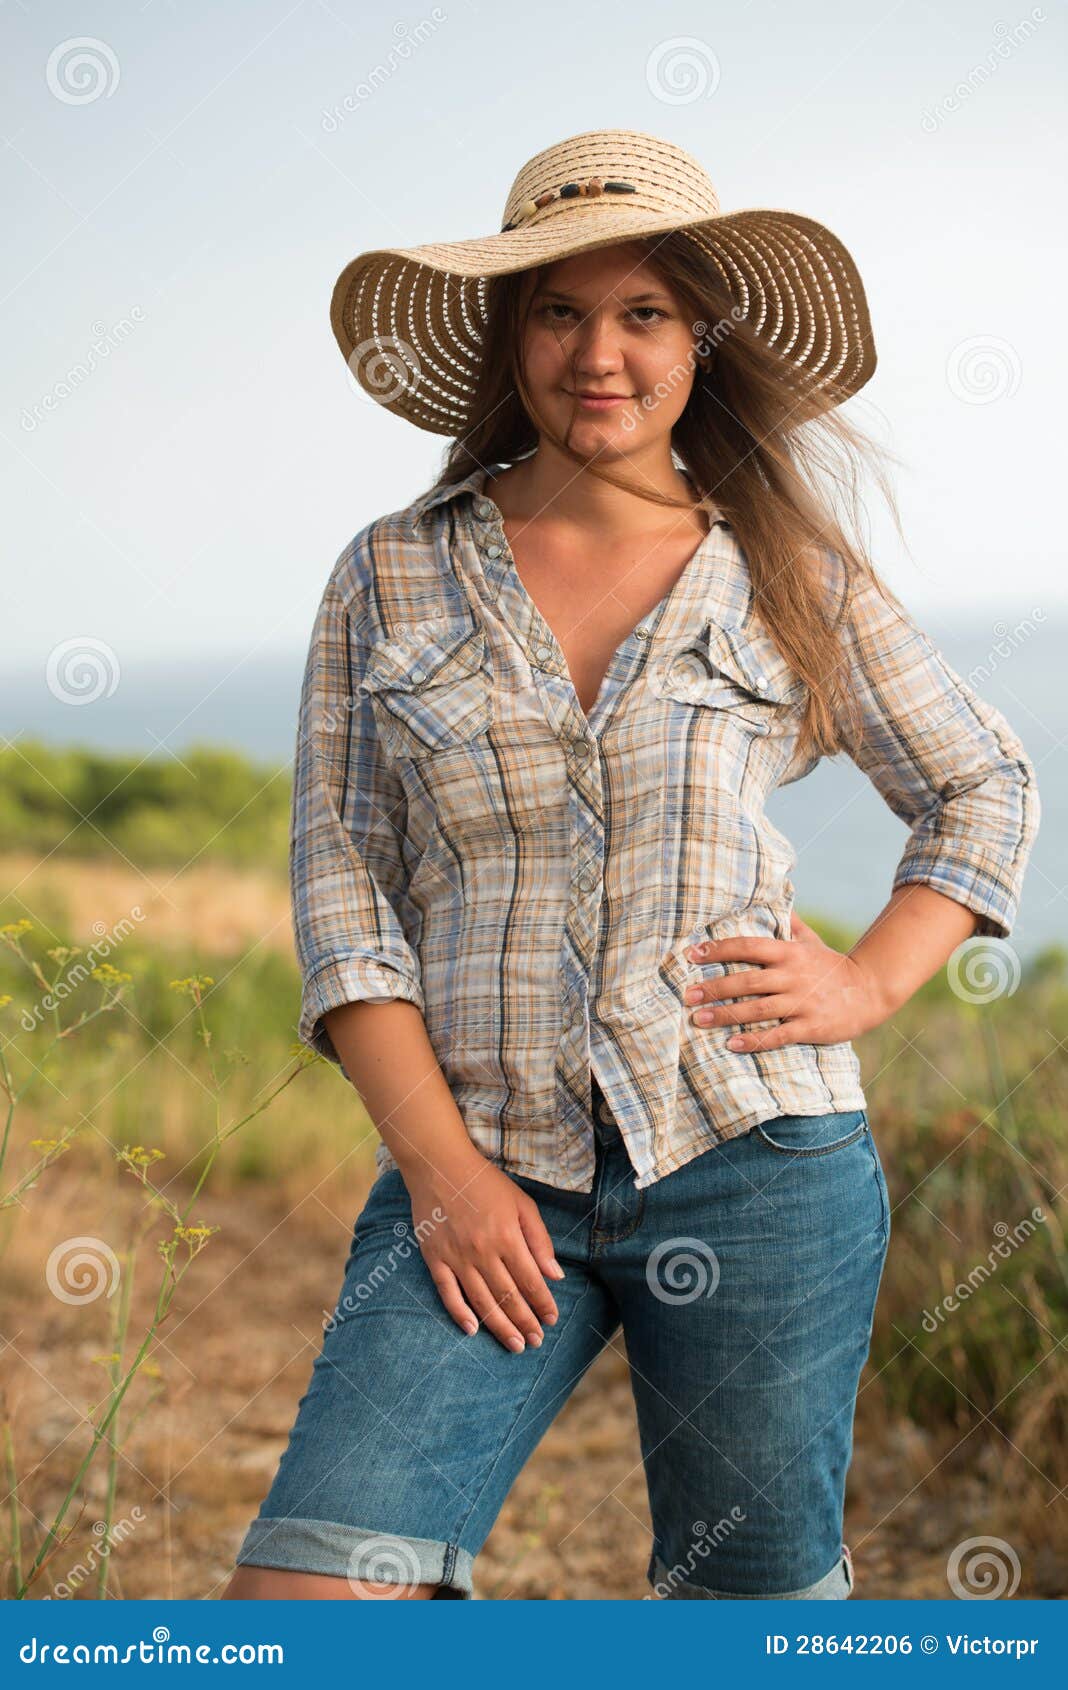 Pretty girl outdoors stock photo. Image of standing, blond - 28642206